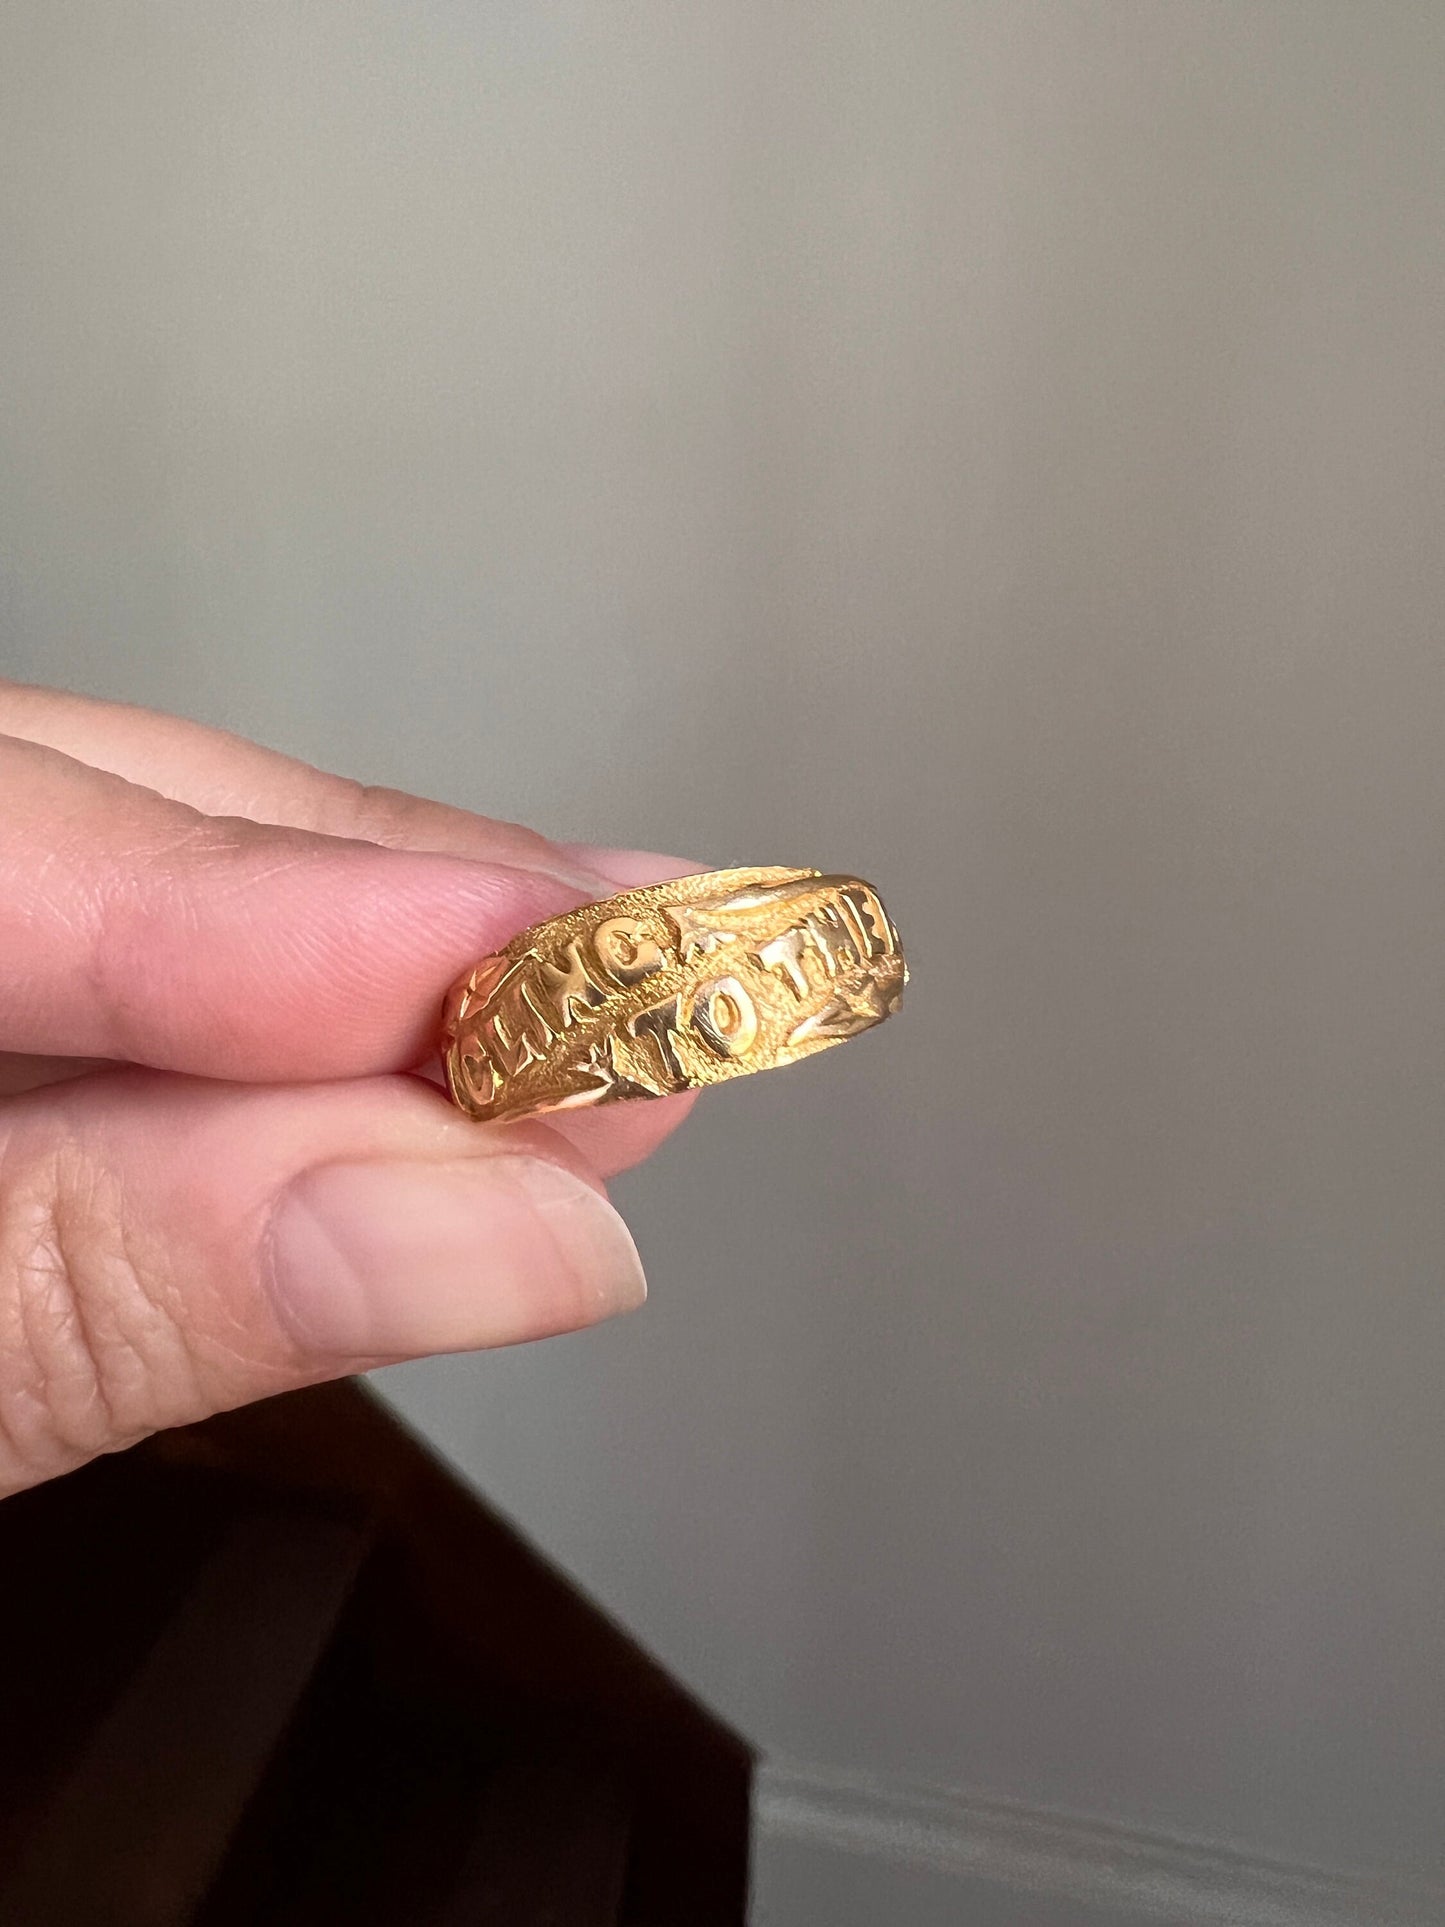 Antique I CLING to THEE Heart IvY Wide Band Ring 2.9g 18k Gold Stacker Wedding Posey Engagement Rare Romantic Gift Poesy Buttery Victorian